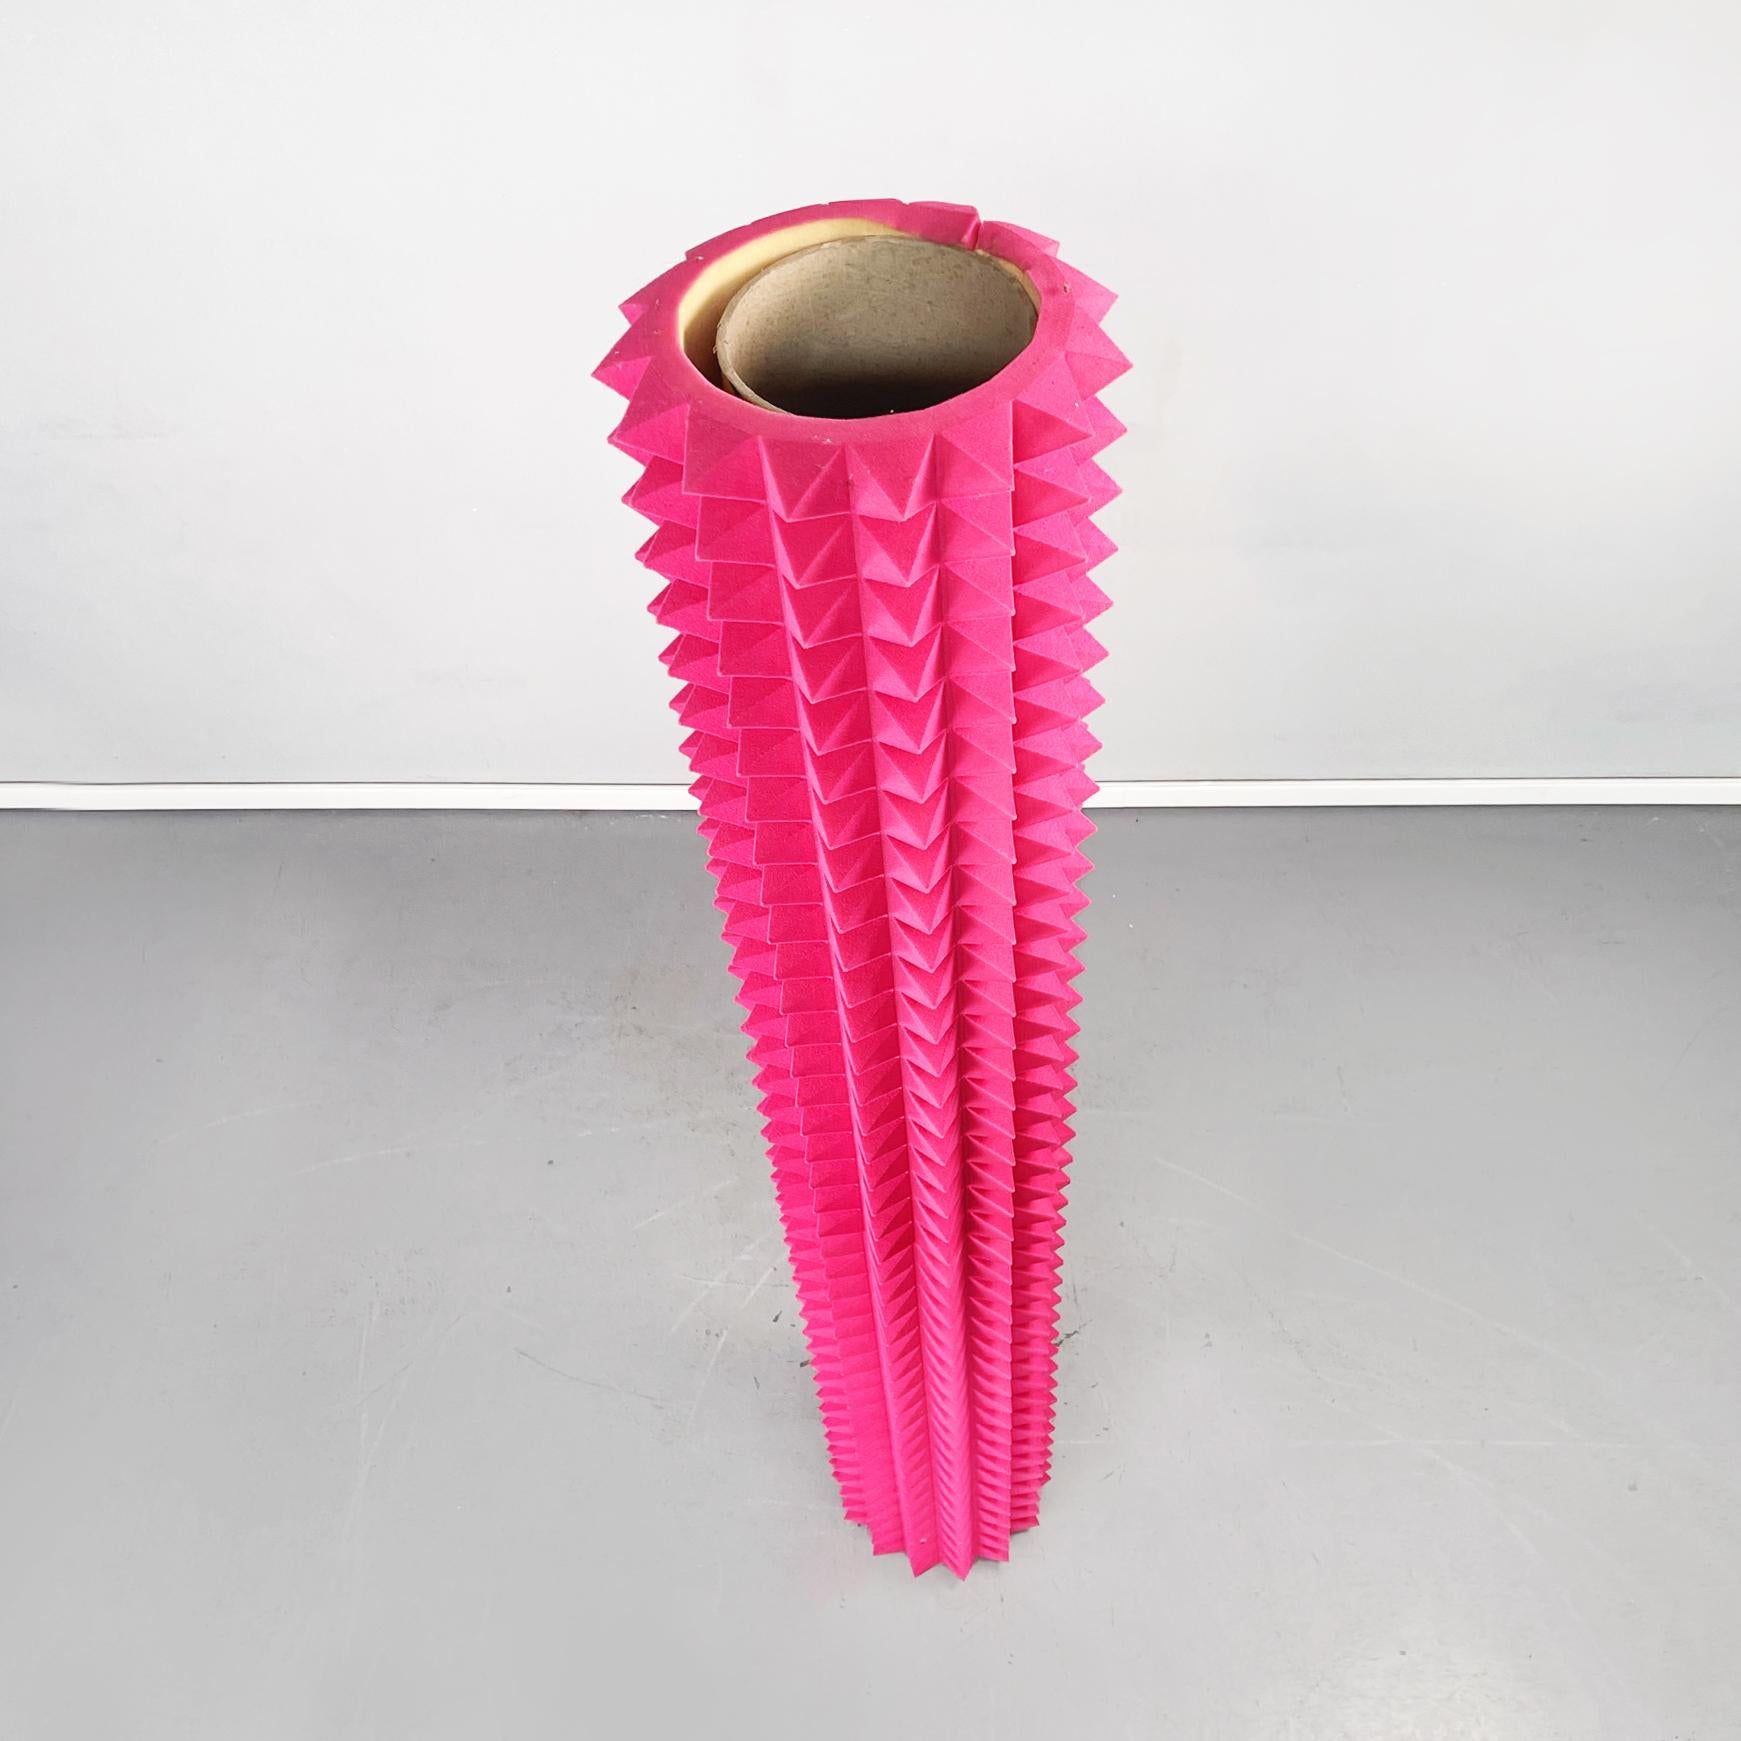 Italian post-modern Cylindrical totem with pyramids in pink foam, 1980-2000s
Cylindrical totem with internal cardboard structure. On the side are placed a series of foam pyramids, painted in bright pink. Suitable to use as a column or modern